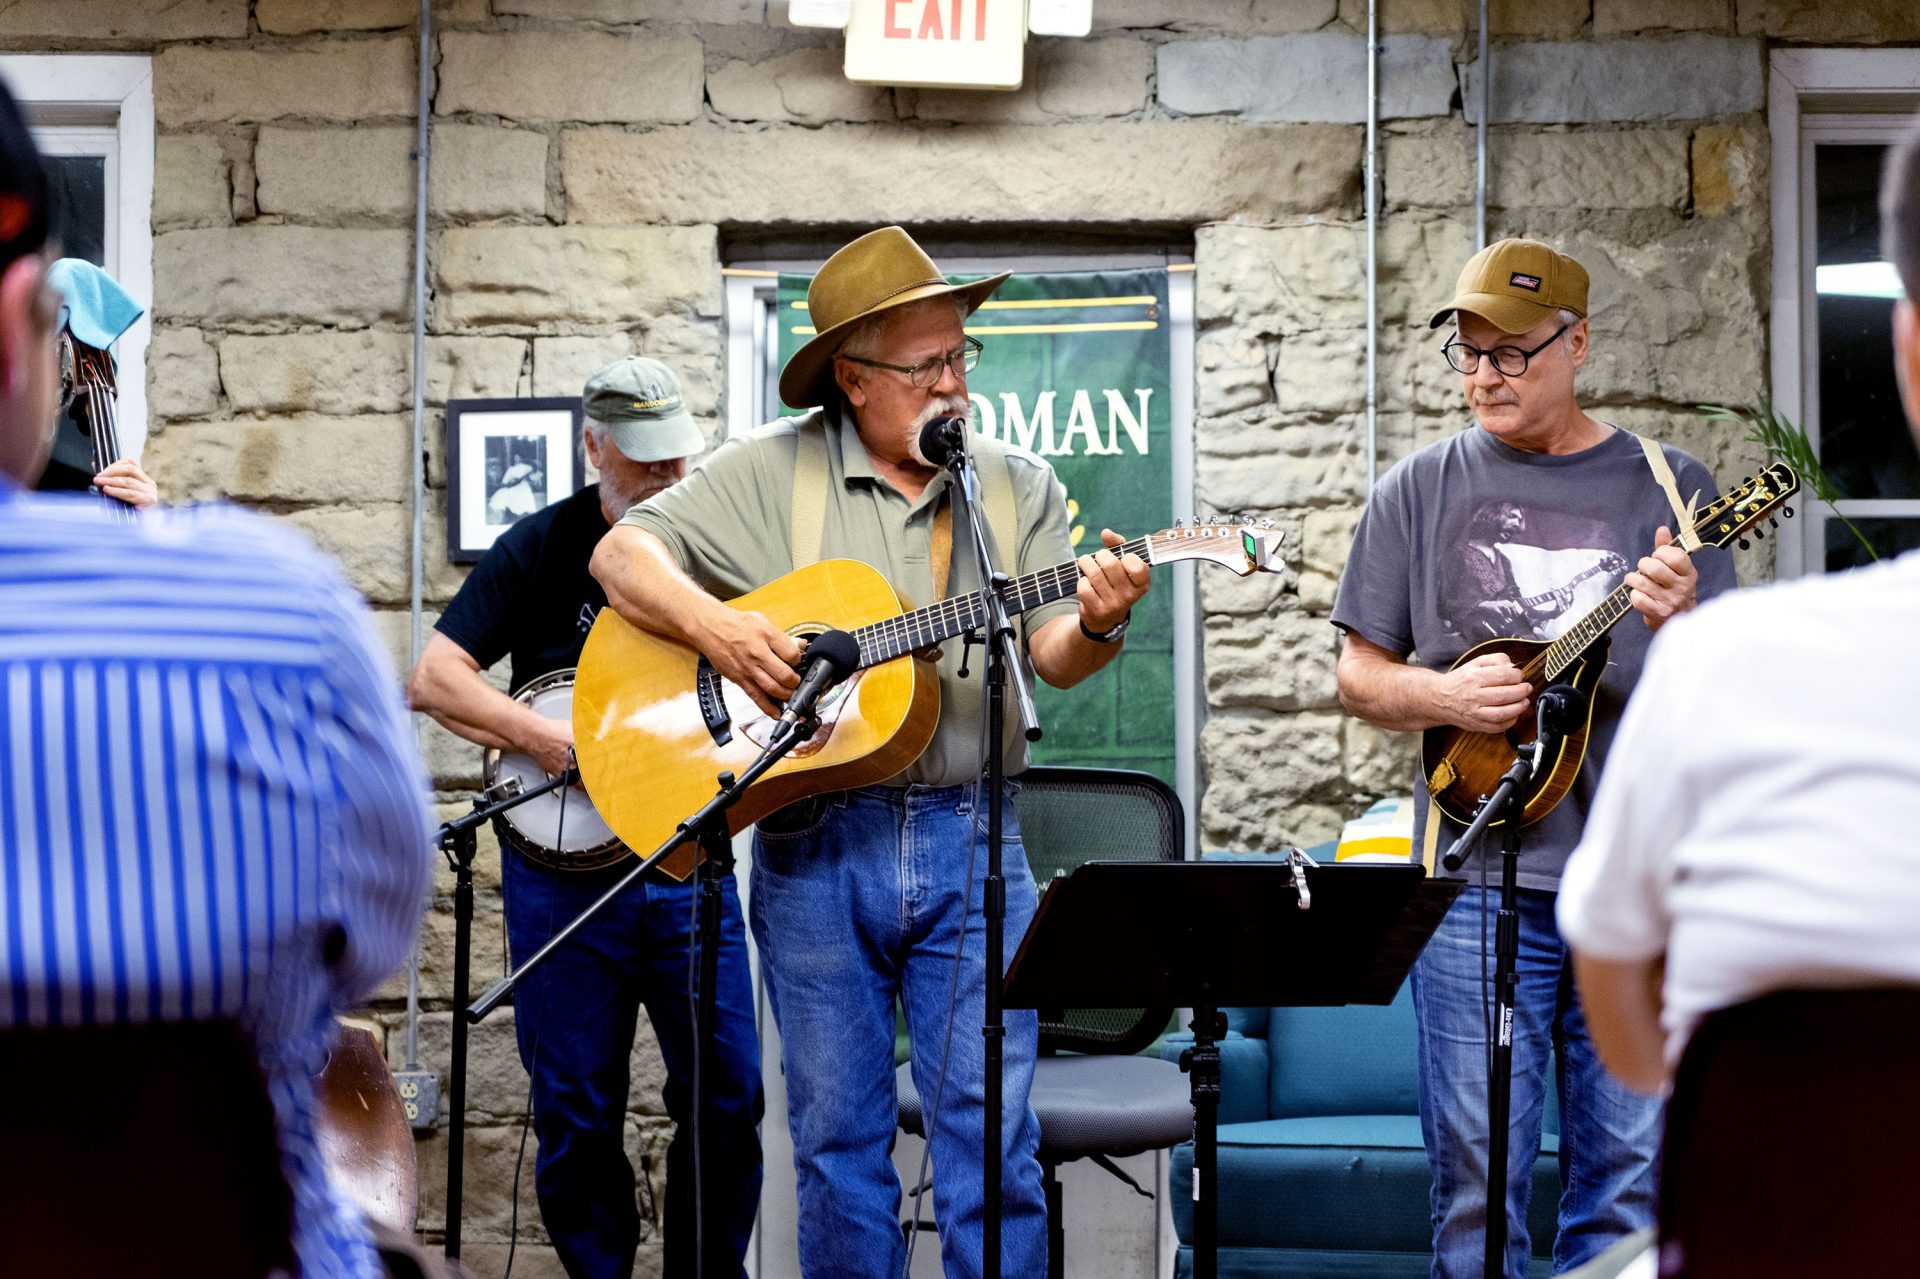 Doug Naselroad (middle) and his band the 'Troublesome Boys' play at the Knott County Downtown Radio Hour. The recorded open mic is hosted once a month.